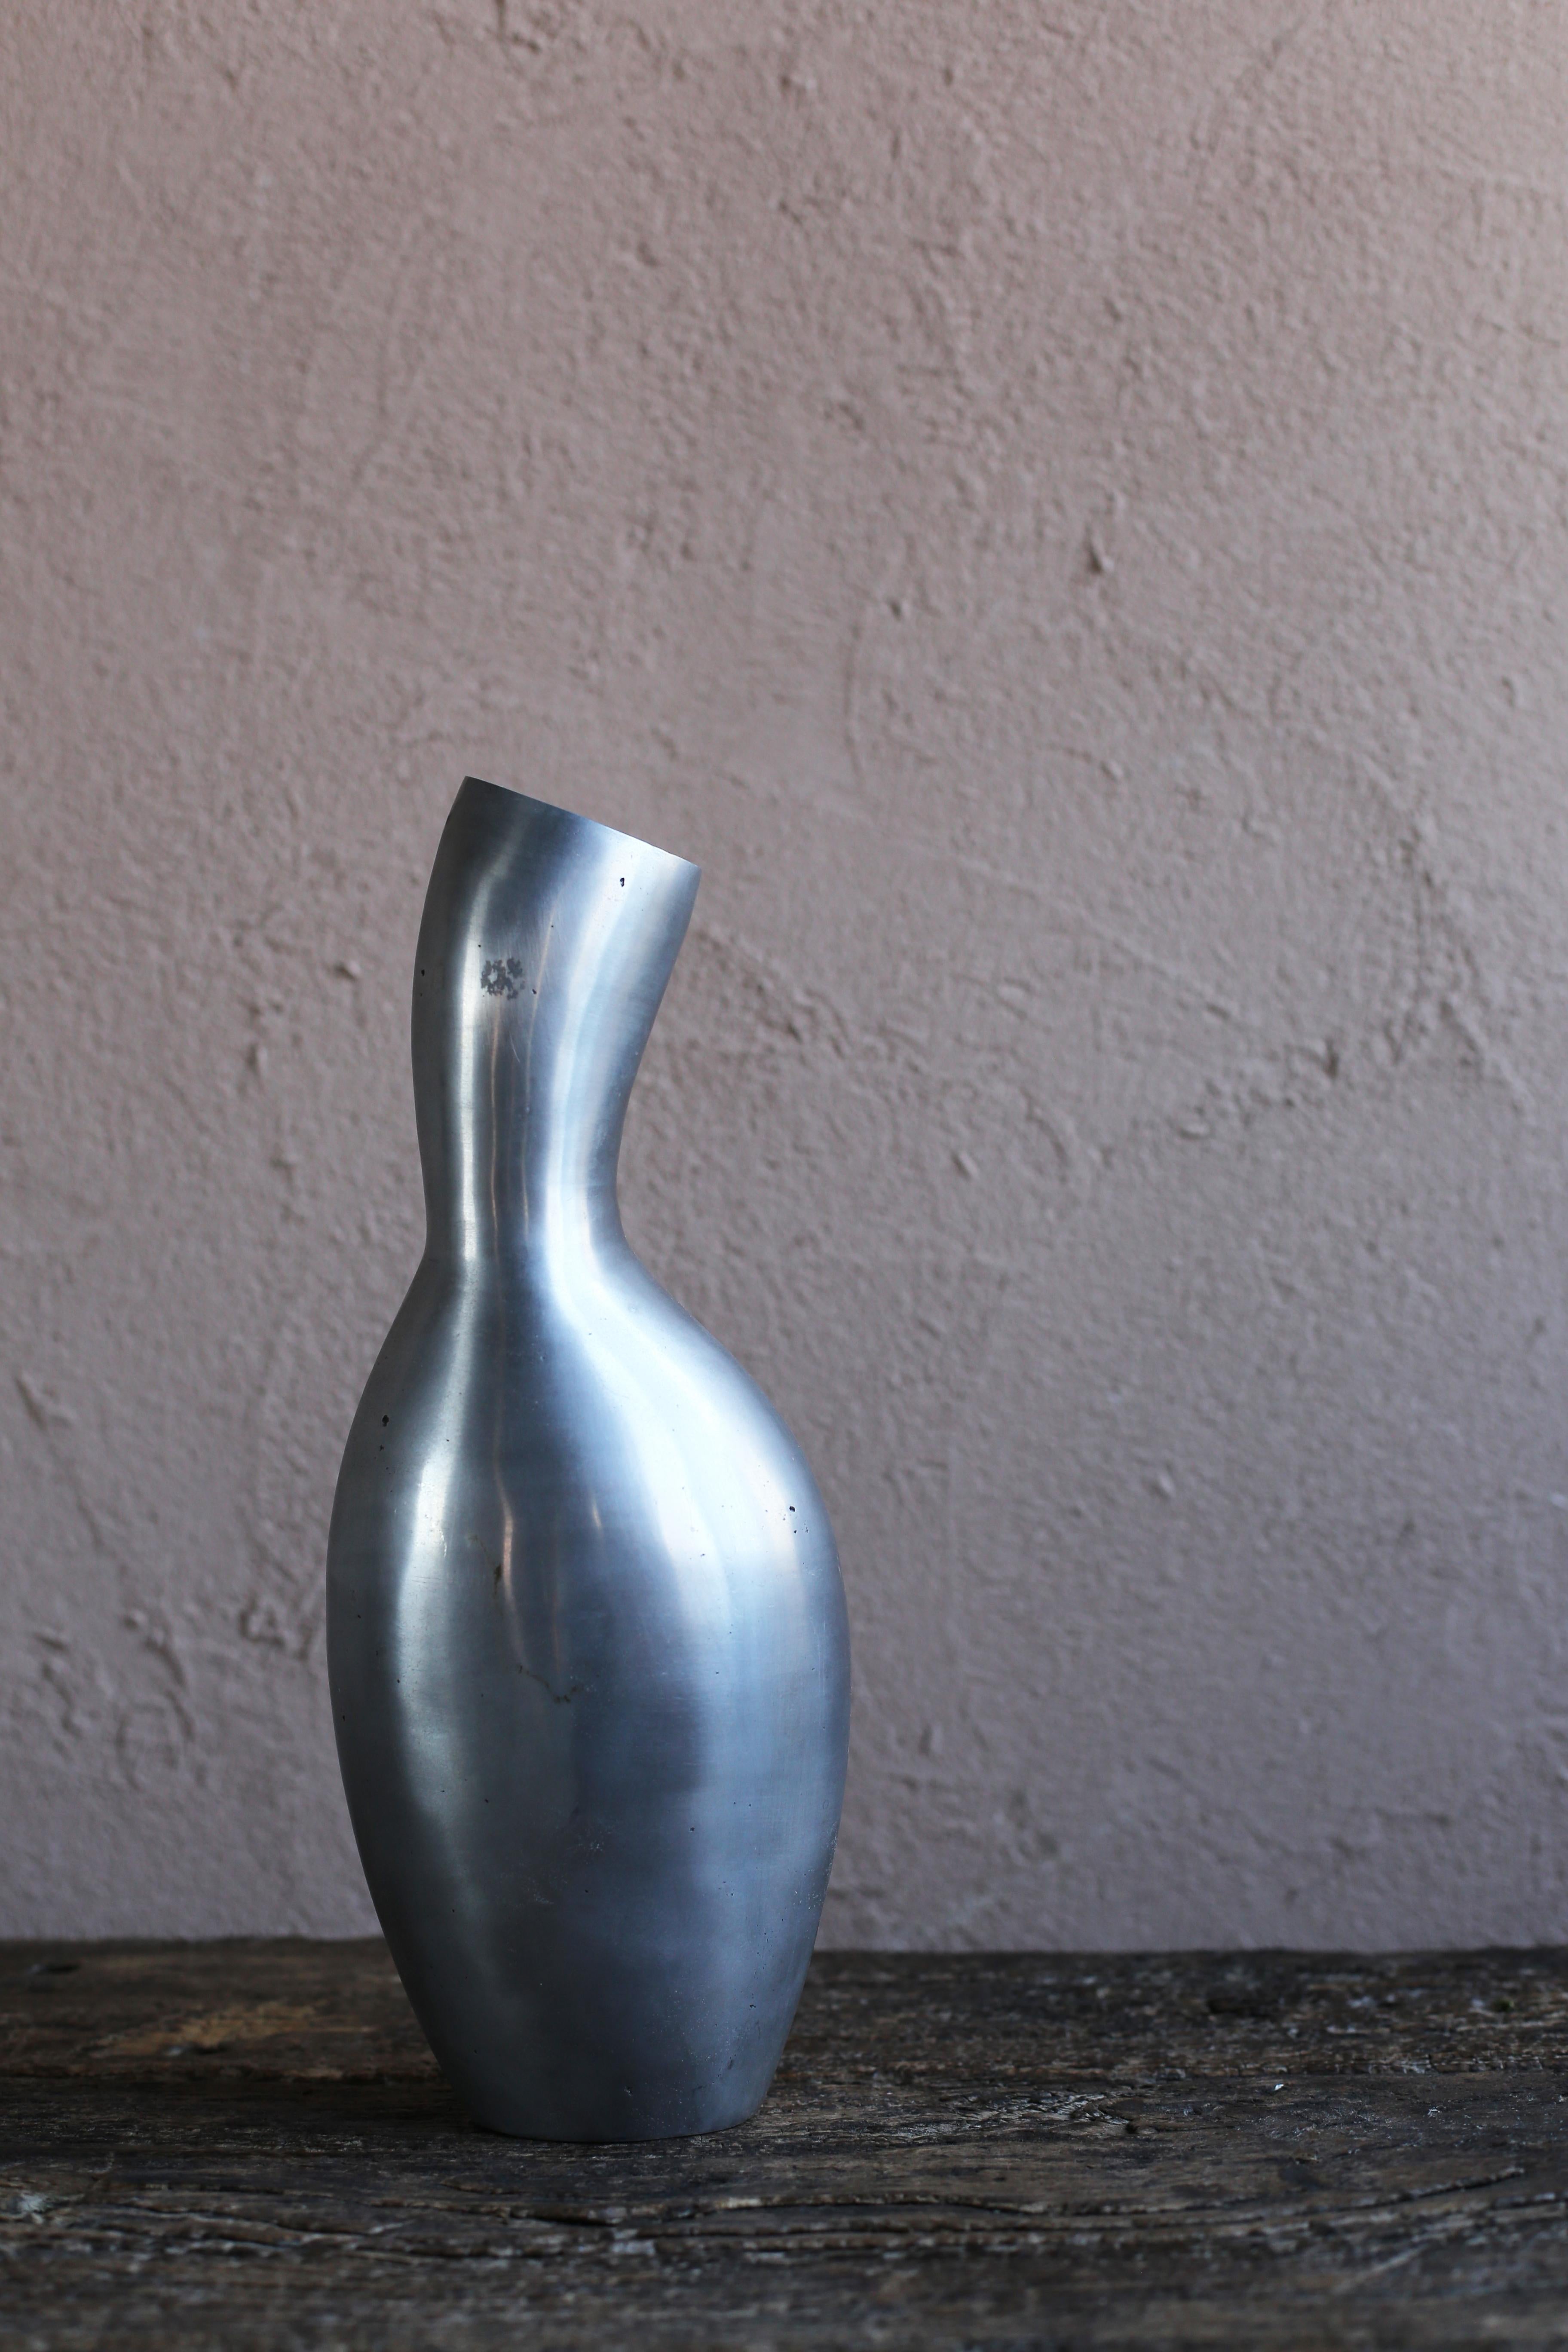 A vintage vase by a Moroccan artist. The artist is unknown. Made of cast aluminum with a unique shape. Polished finish.